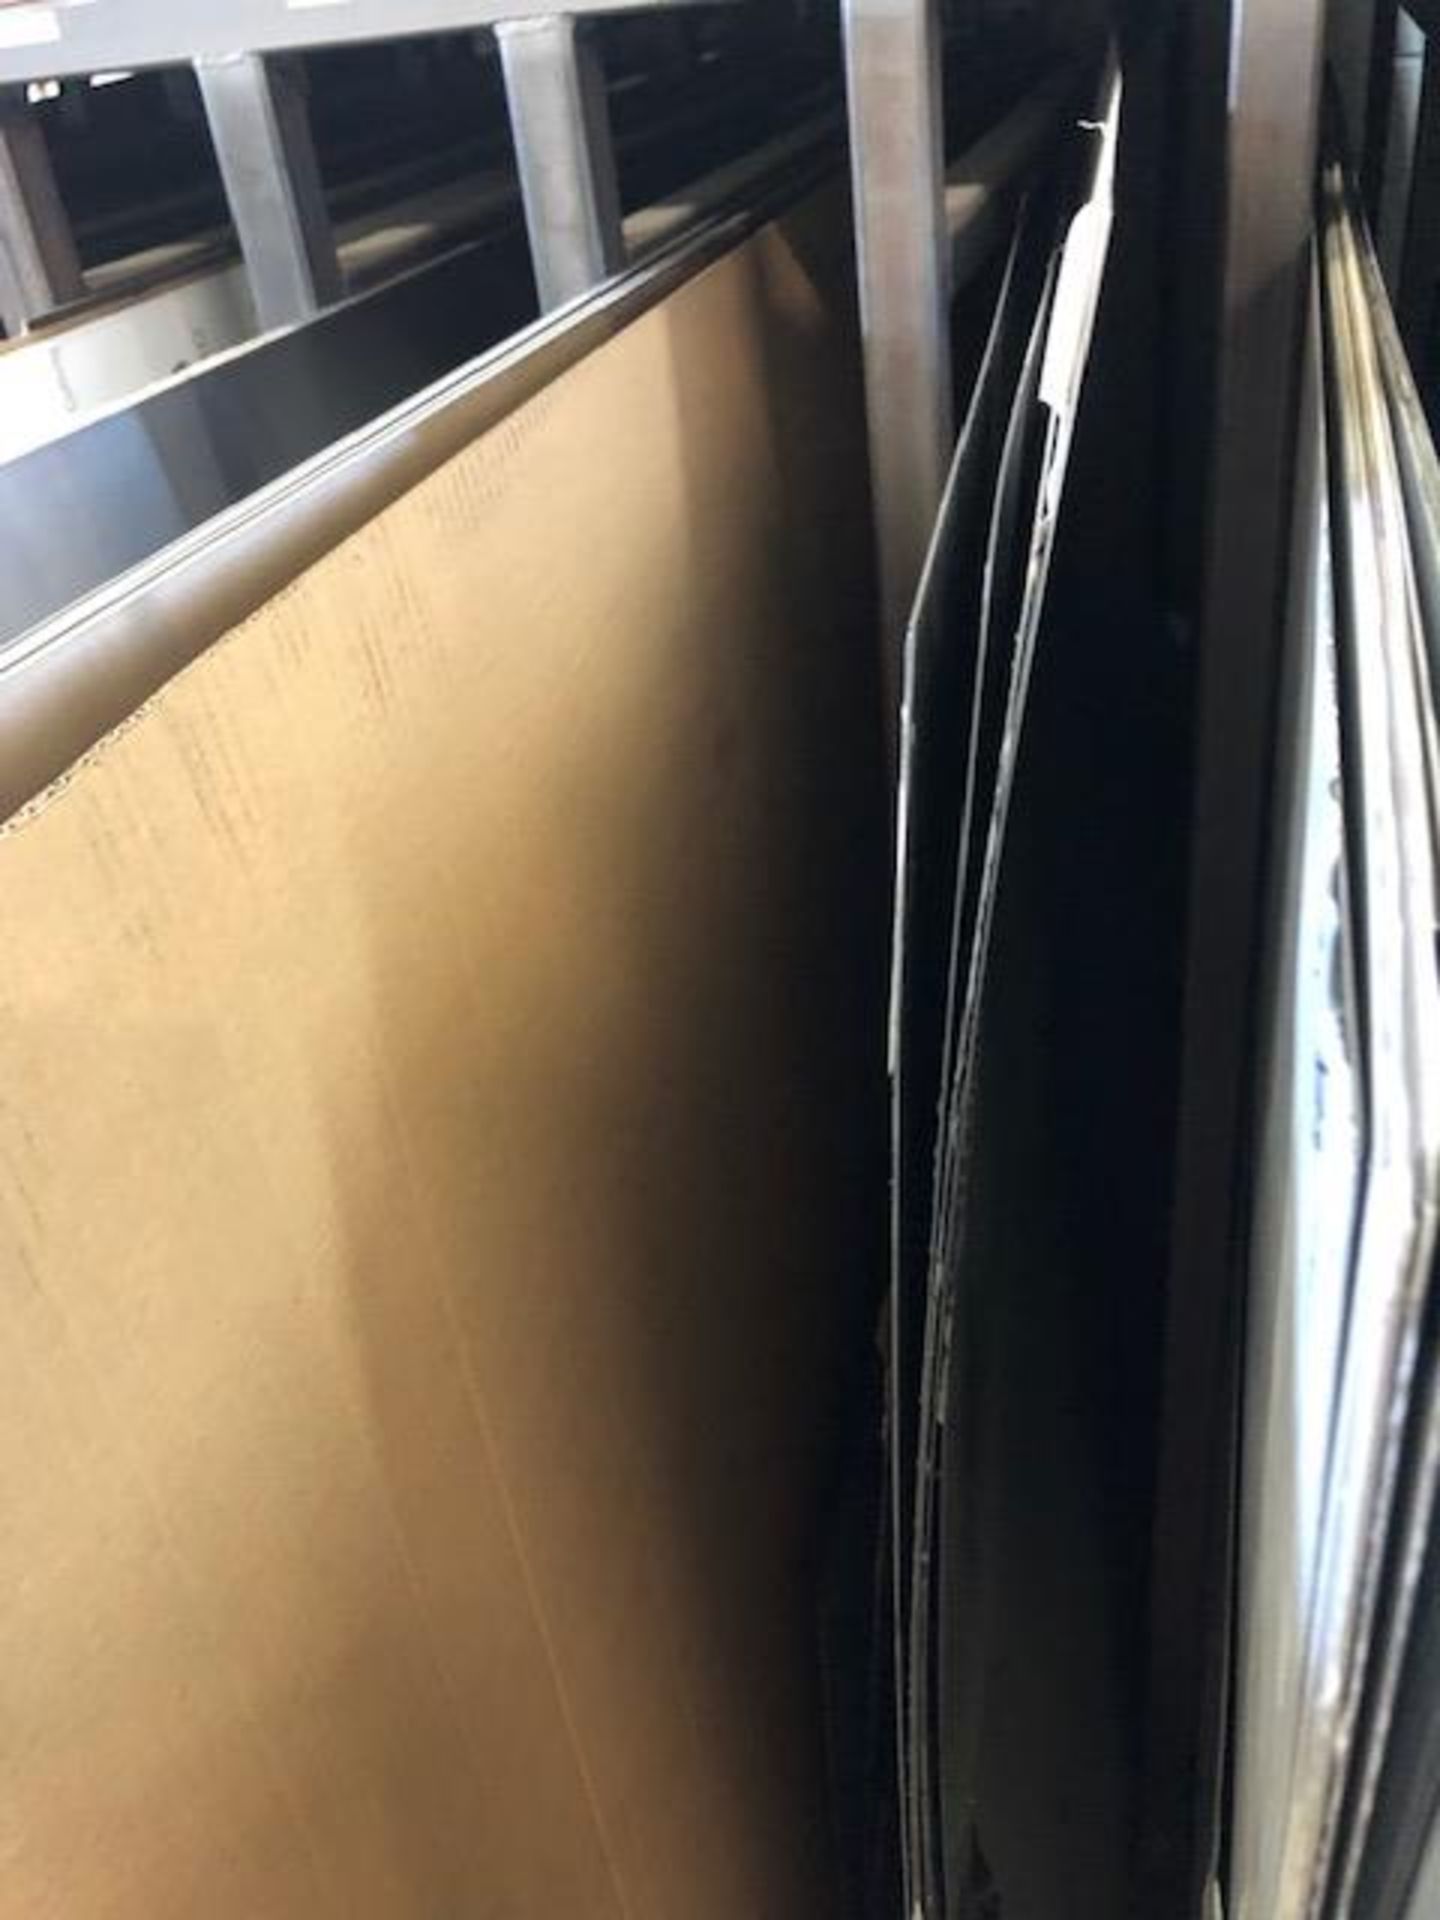 LOT OF (3) 20 GA., 48" X 96", STAINLESS STEEL, SHEETS - Image 2 of 2